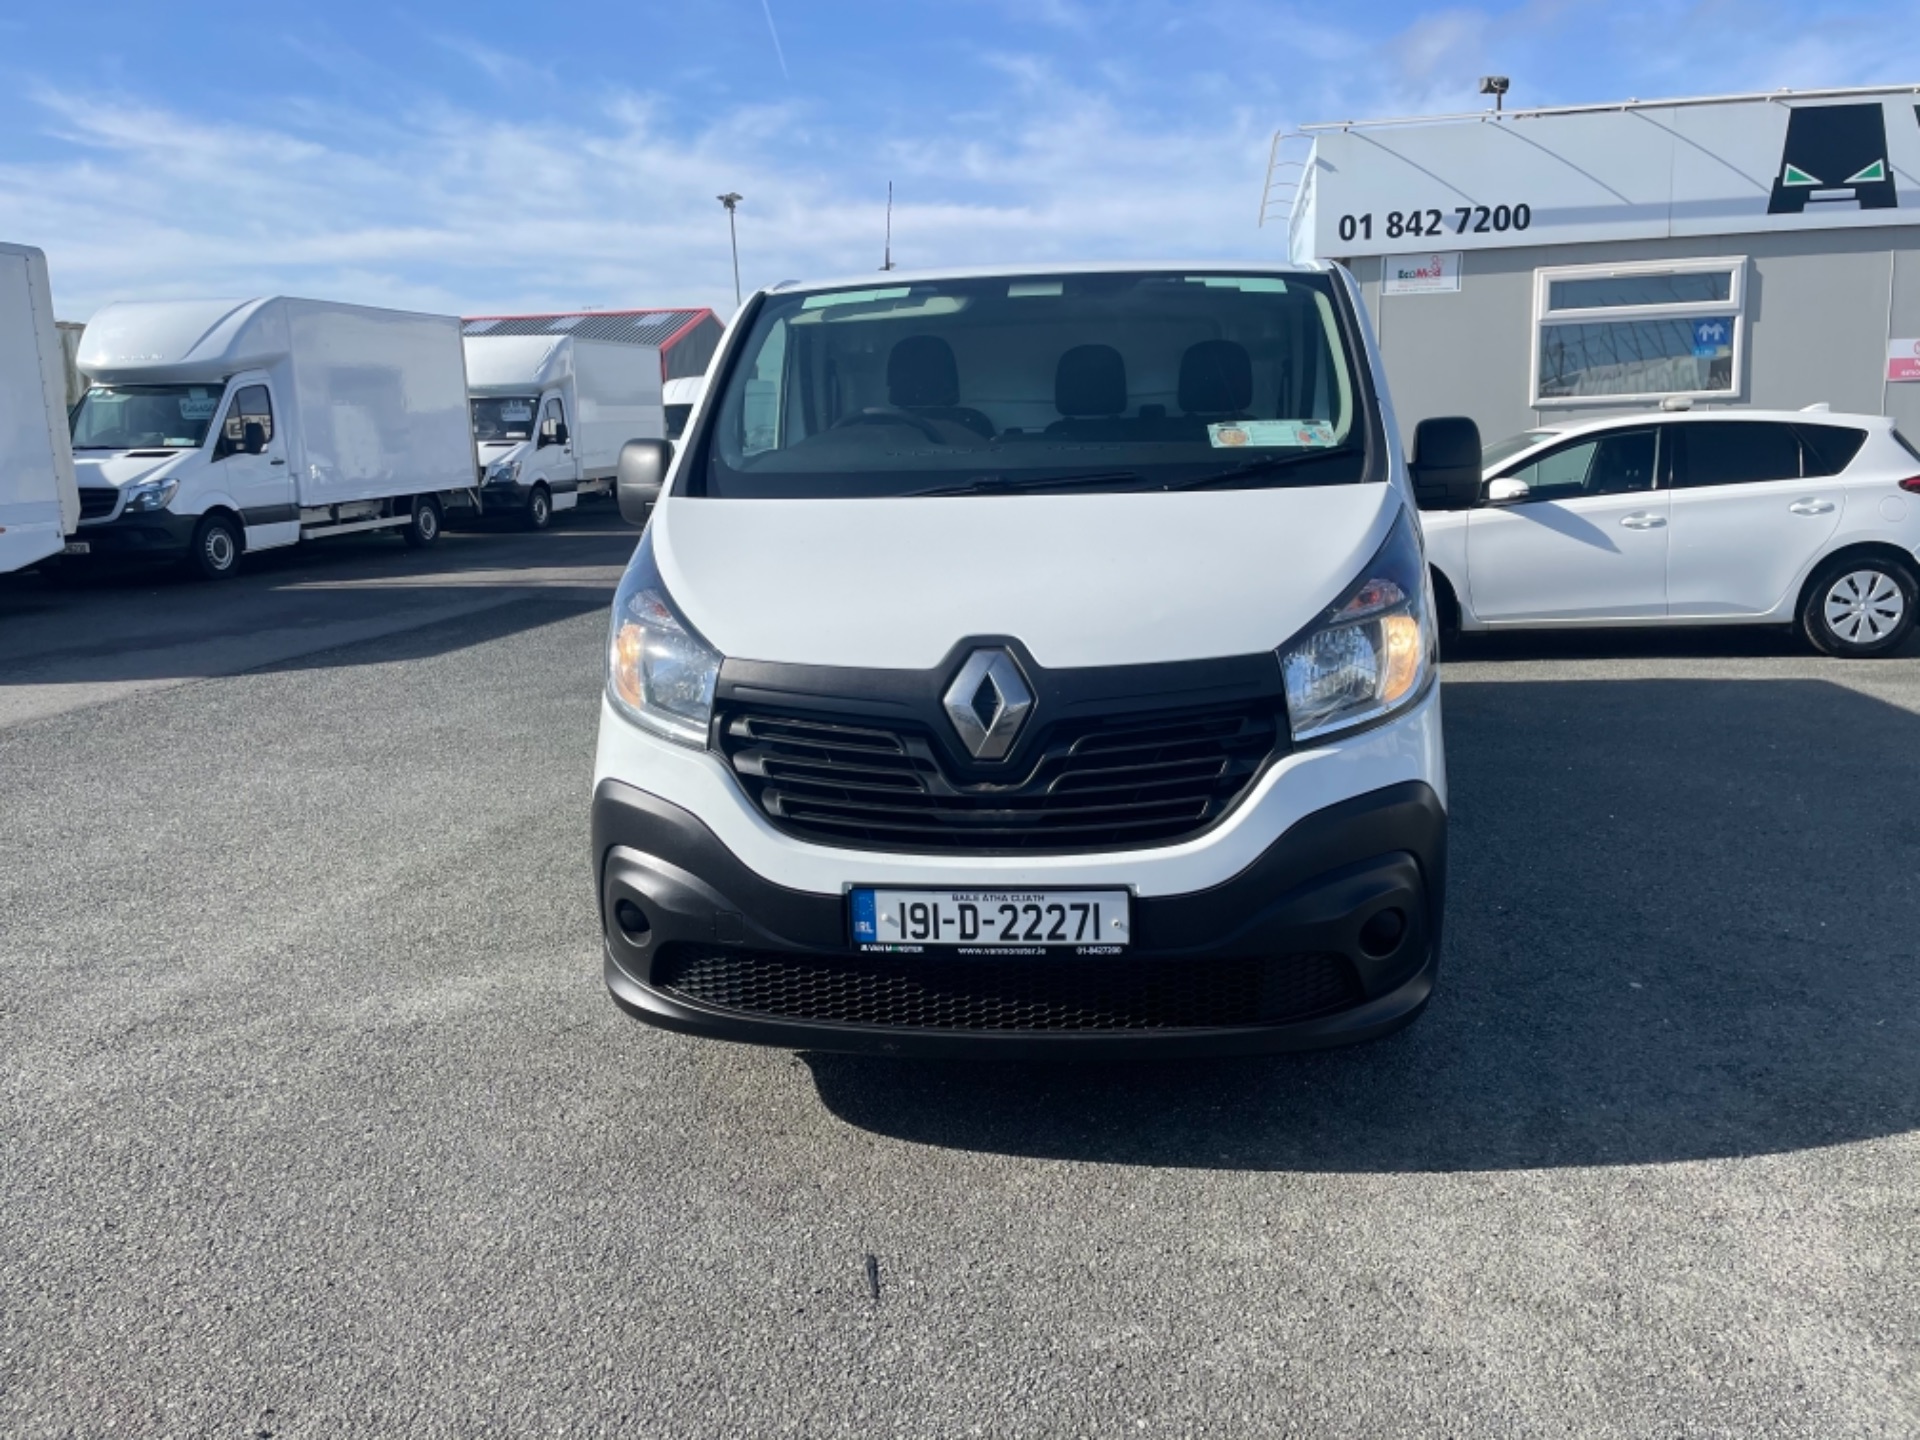 2019 Renault Trafic LL29 DCI 120 Business (191D22271) Thumbnail 2